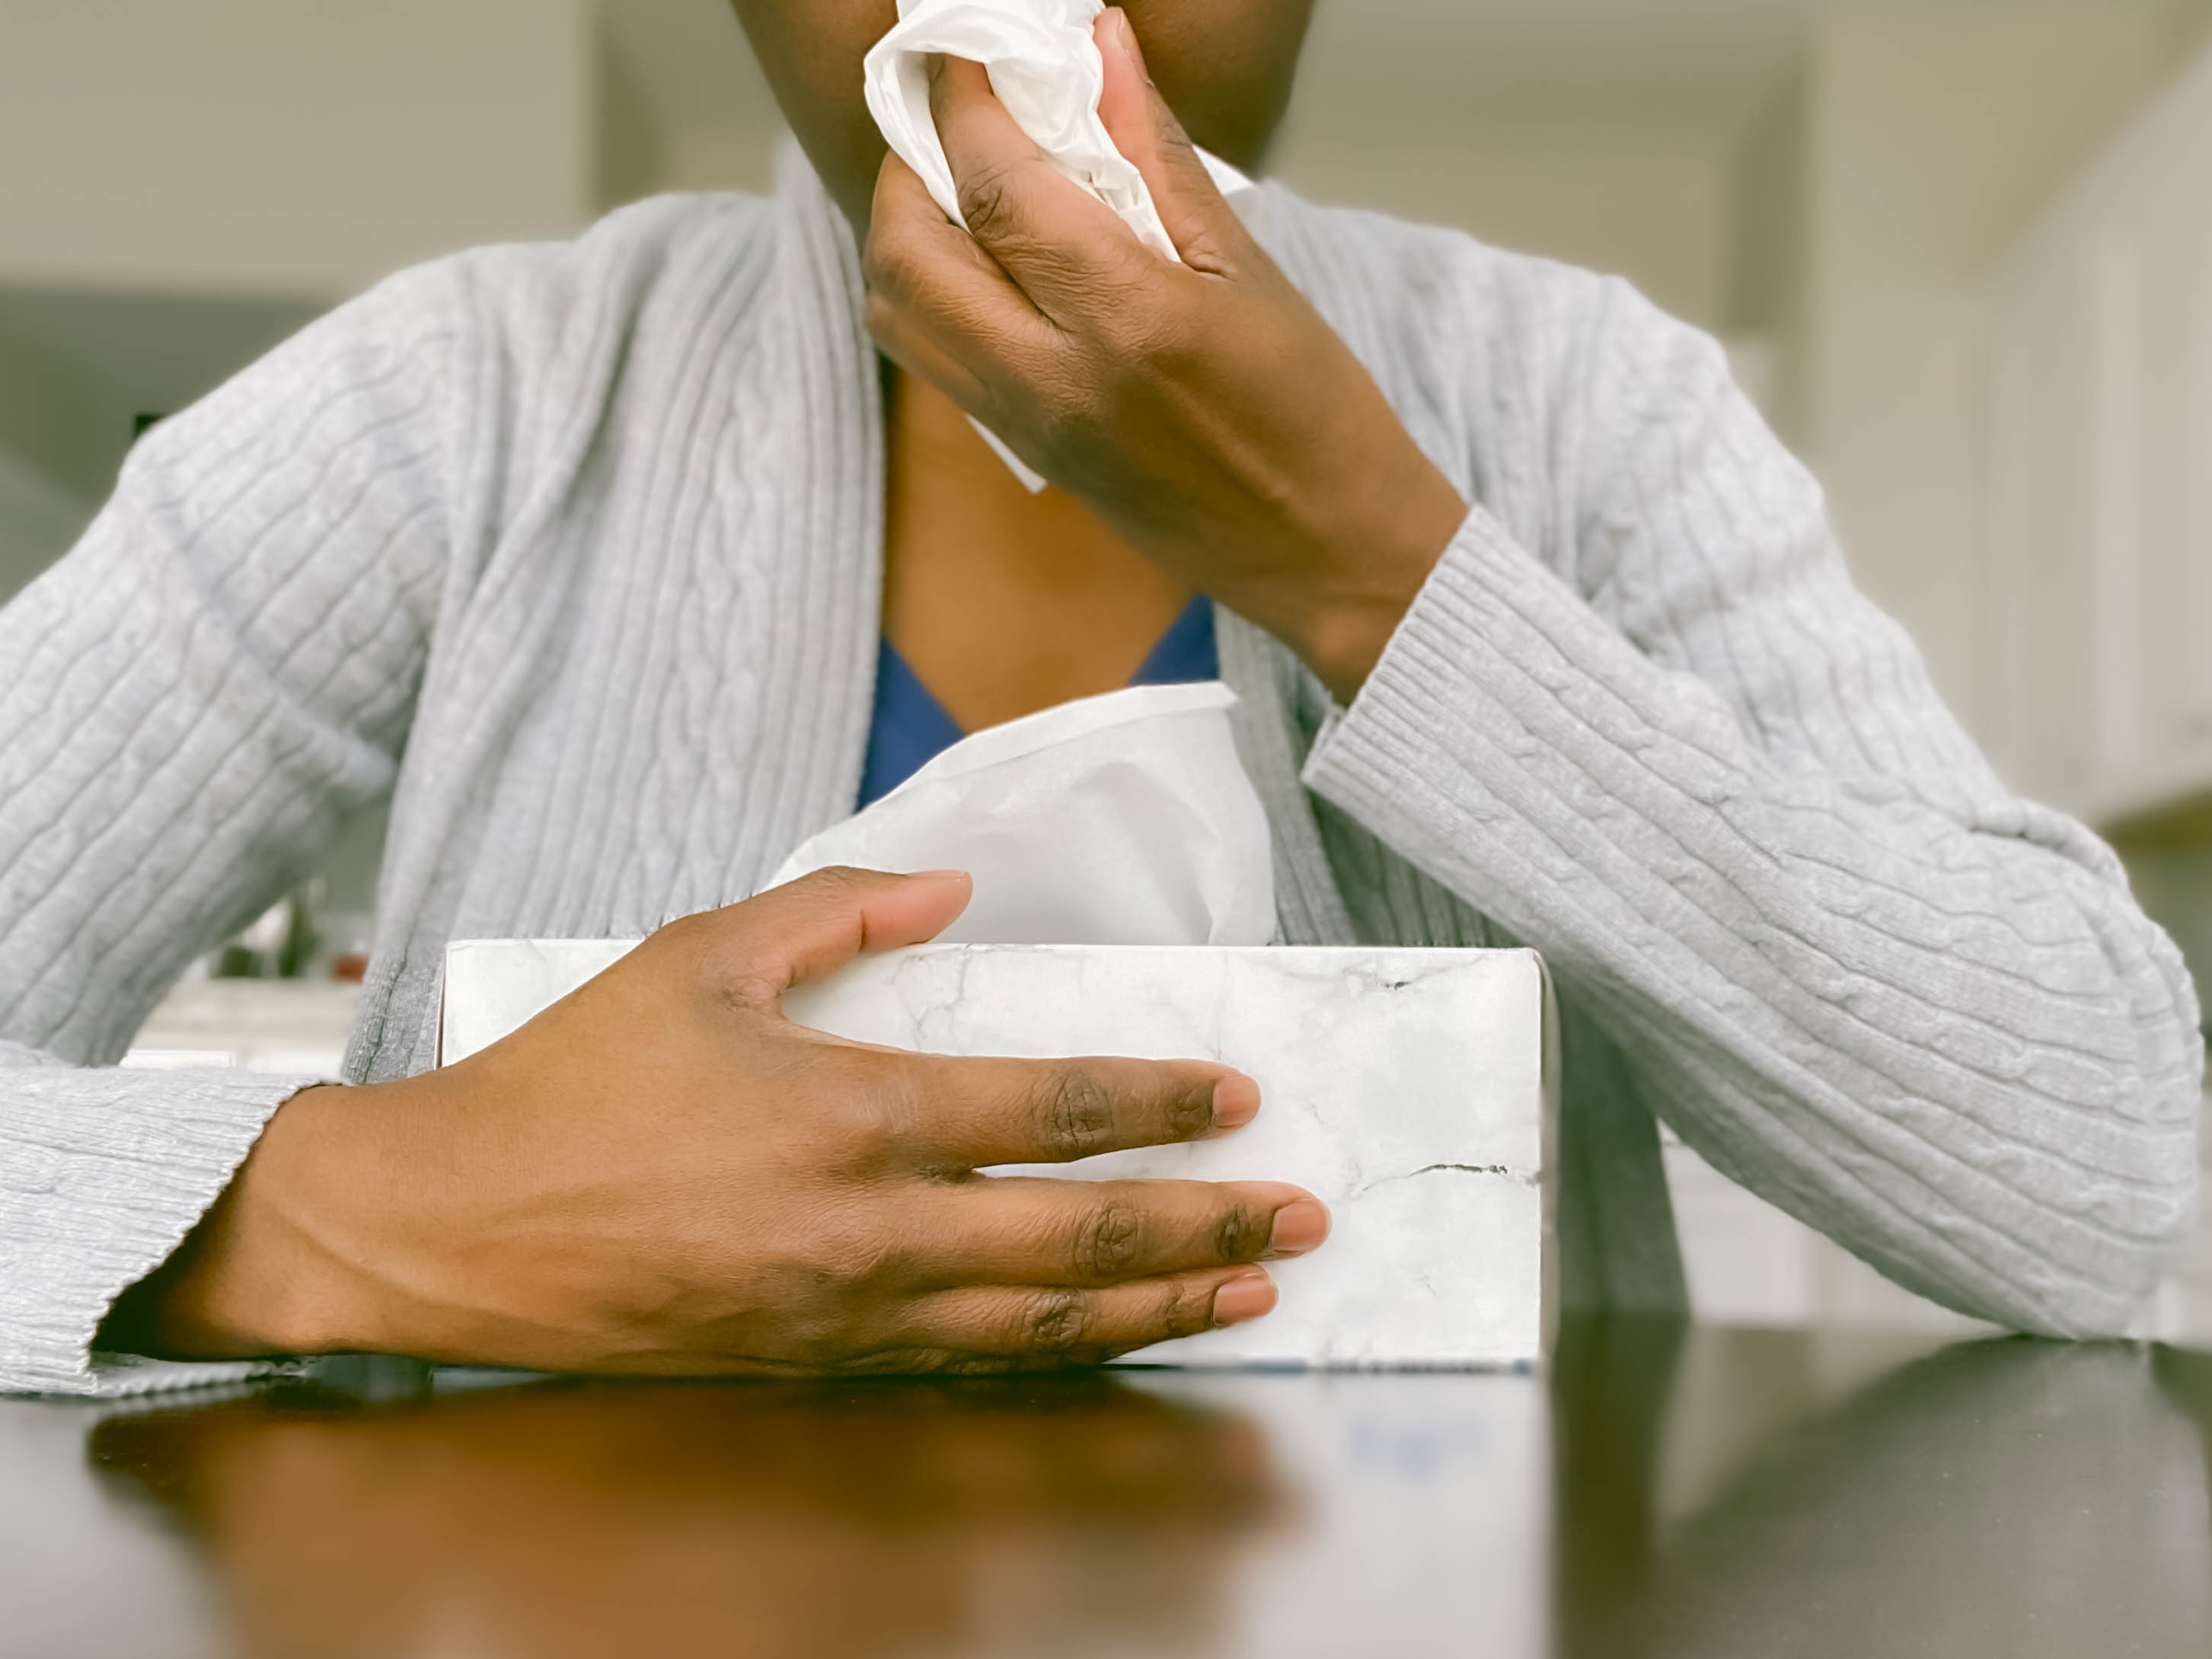 The last flu season was a bad one. What’s in store this year?